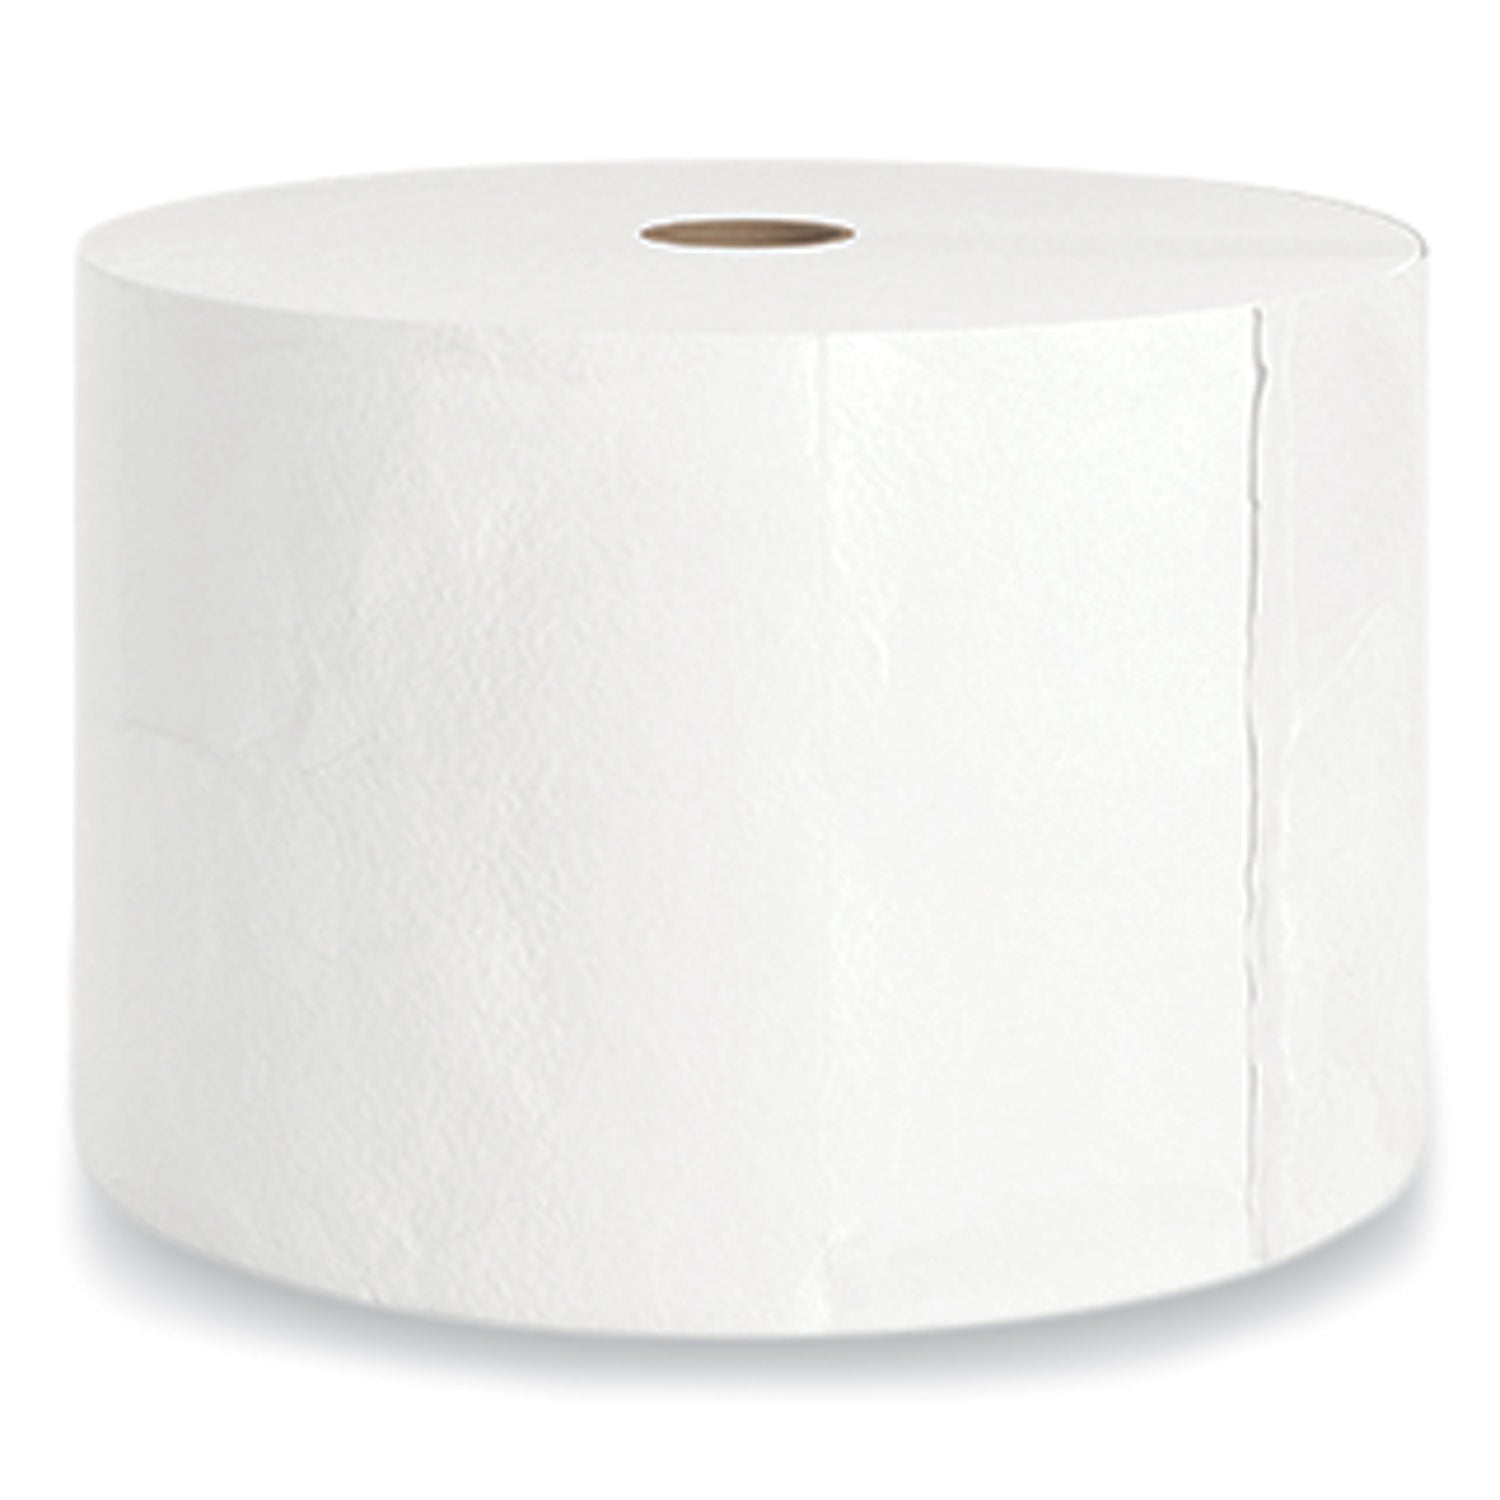 j-series-1-ply-small-core-bath-tissue-septic-safe-white-4-x-1000-ft-3000-sheets-roll-18-rolls-carton_cwz24405972 - 3